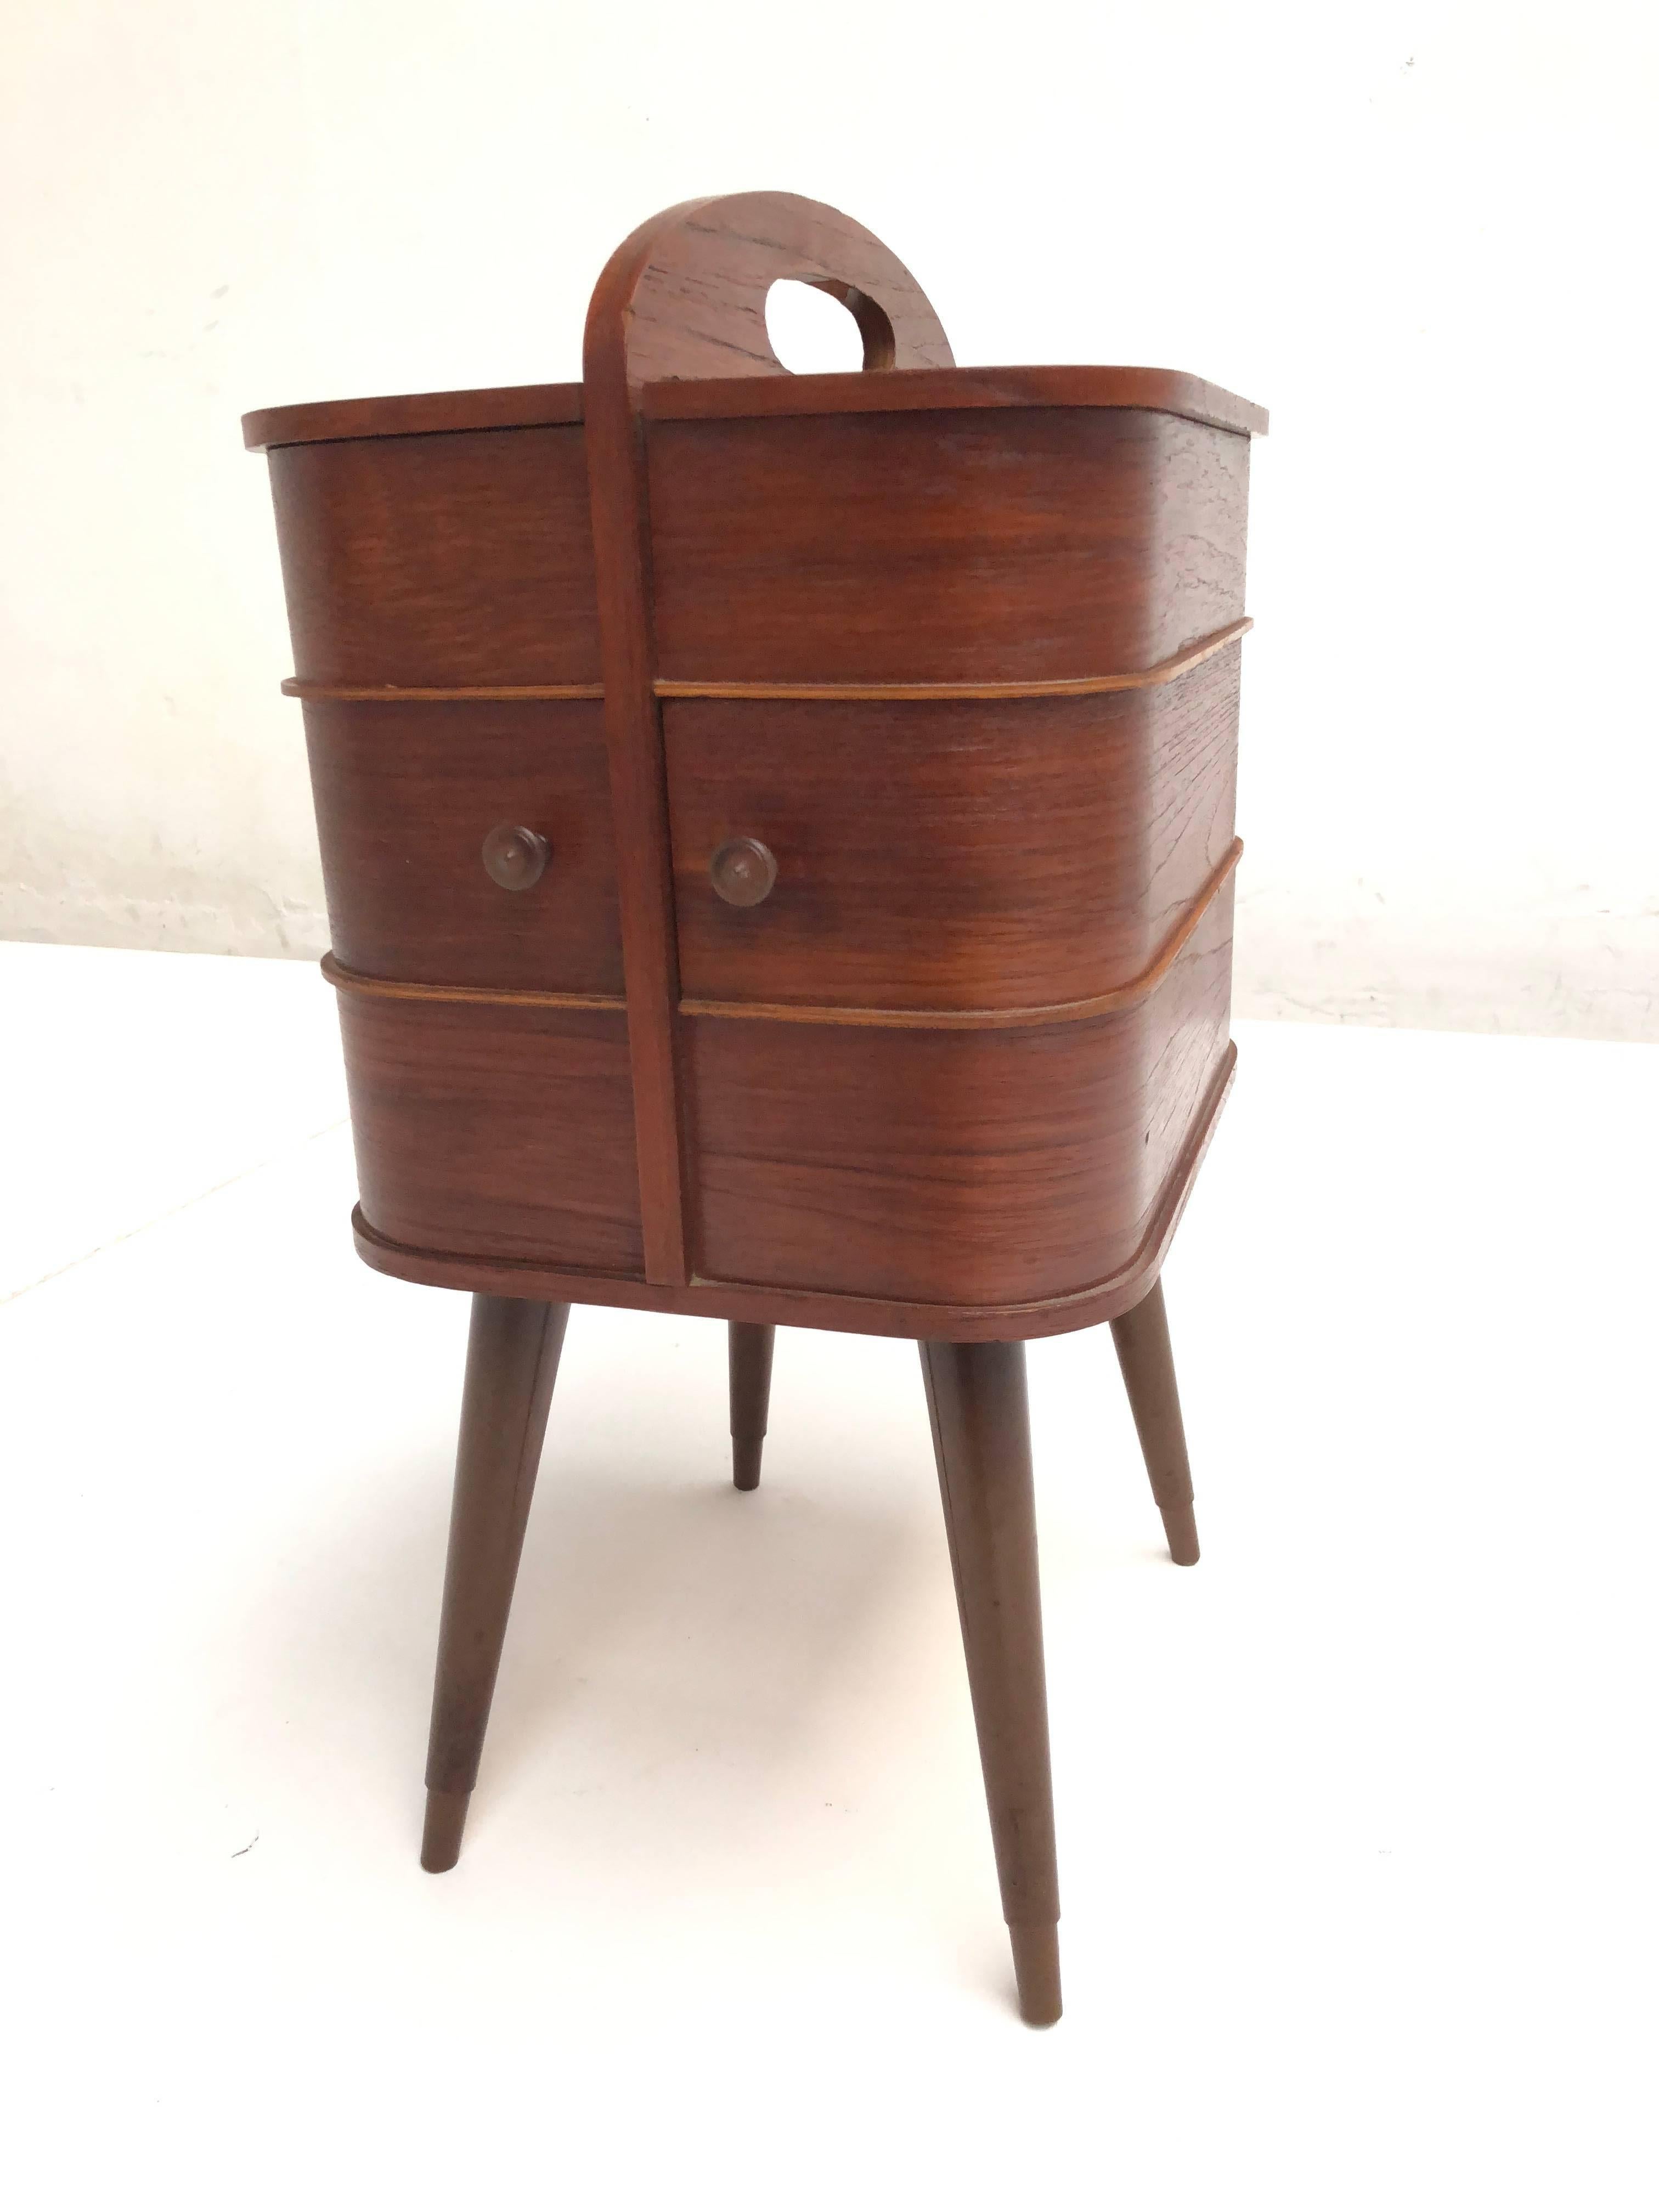 Molded Adorable Danish Teak Plywood Sewing Box Distributed by Pastoe in the 1950s